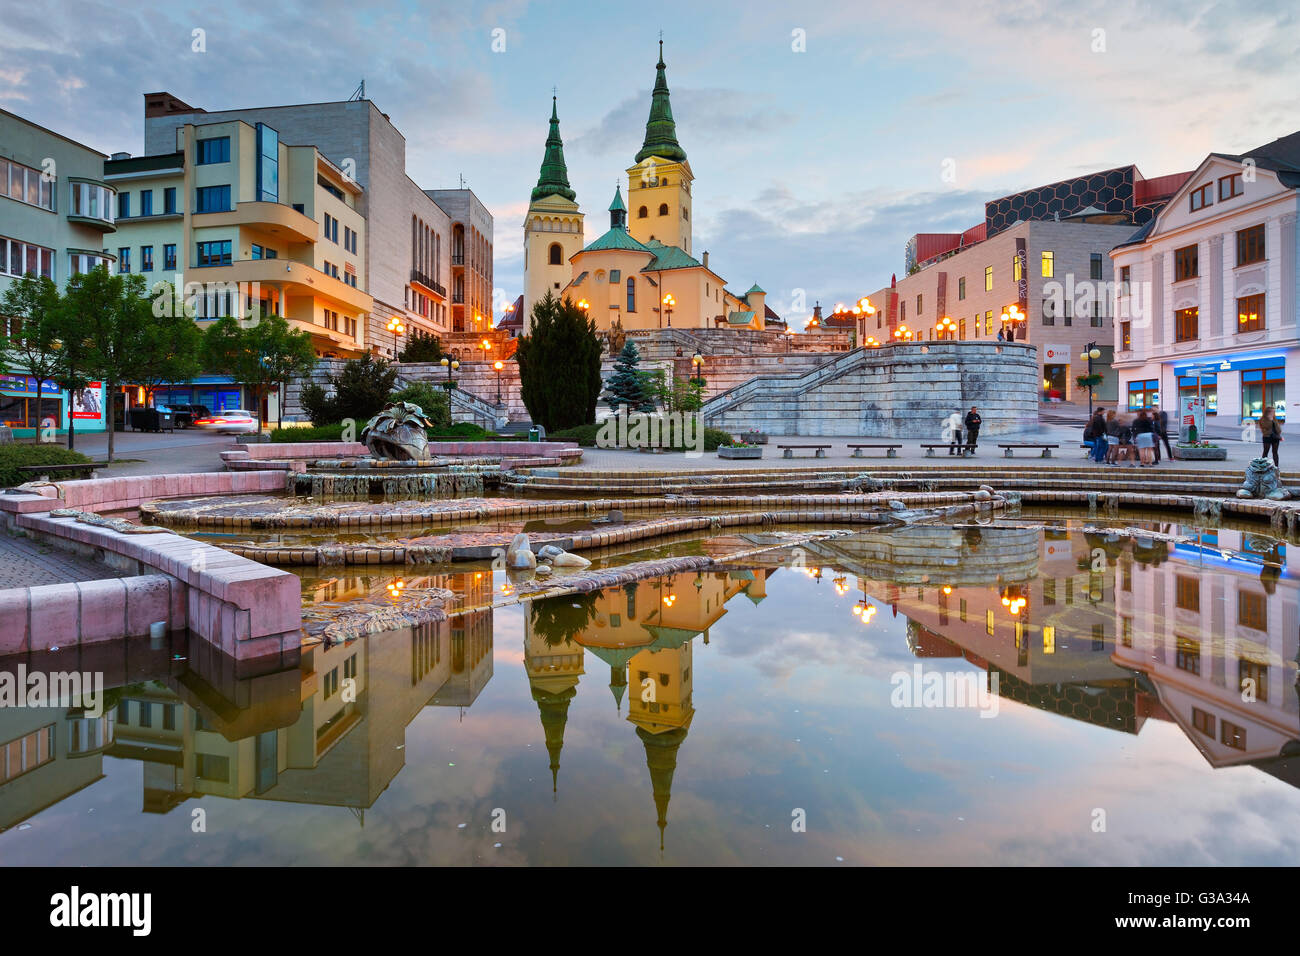 Main square in the city of Zilina in central Slovakia. Stock Photo